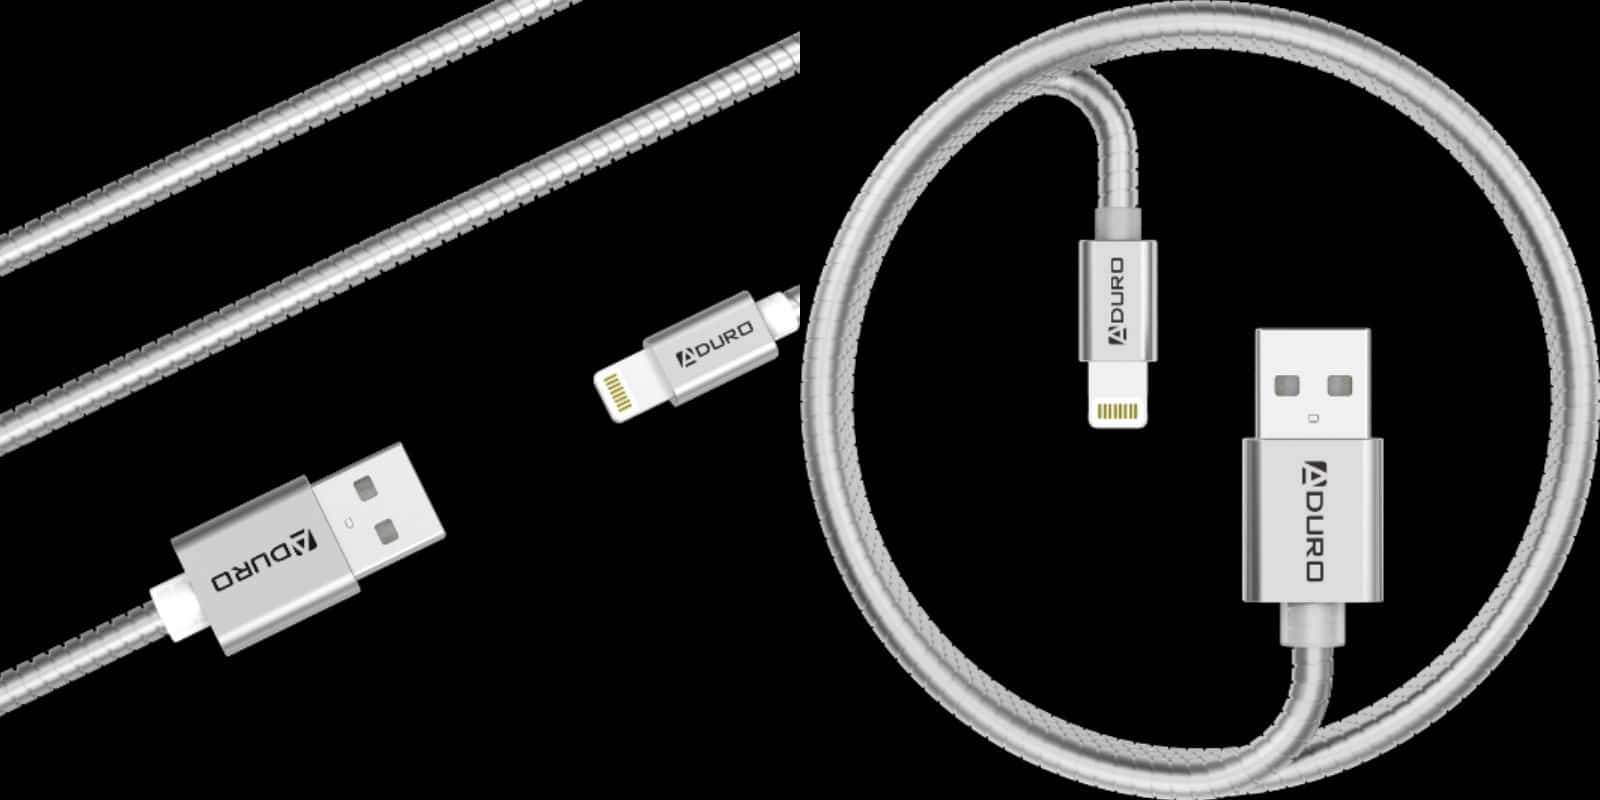 This metal-reinforced Lightning cable adds extra life and length to your iDevice's lifeline.